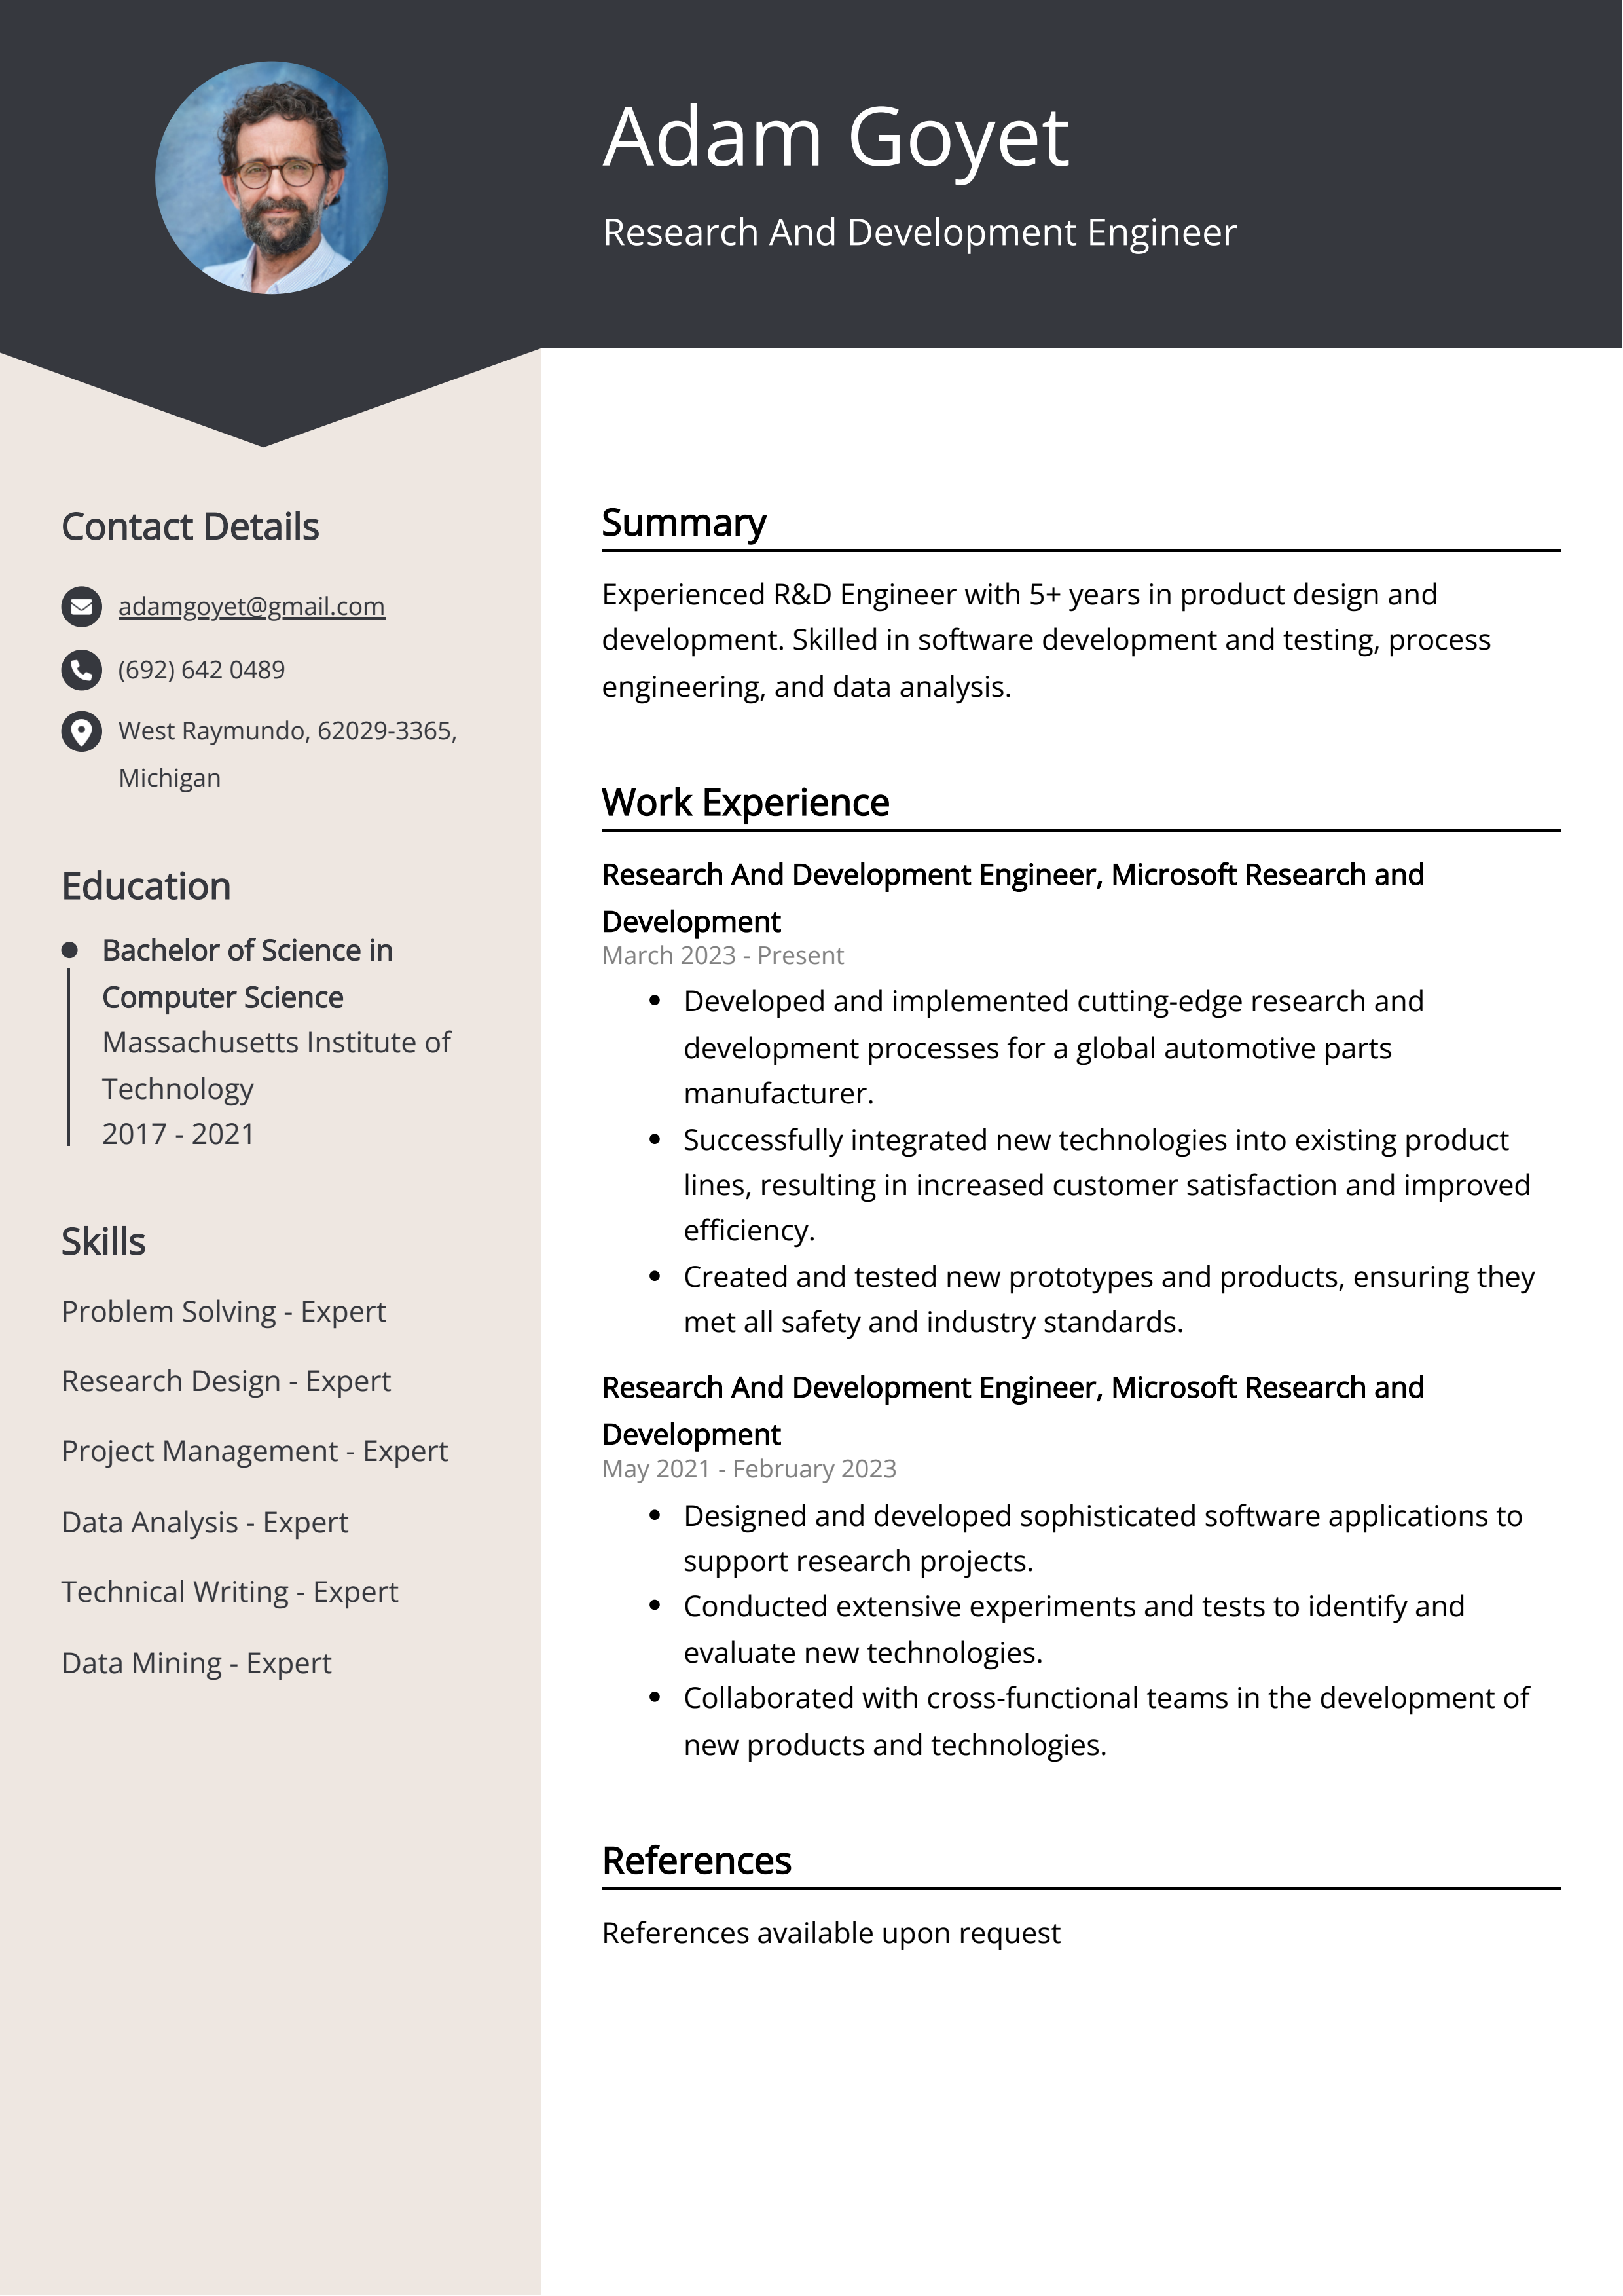 Research And Development Engineer CV Example